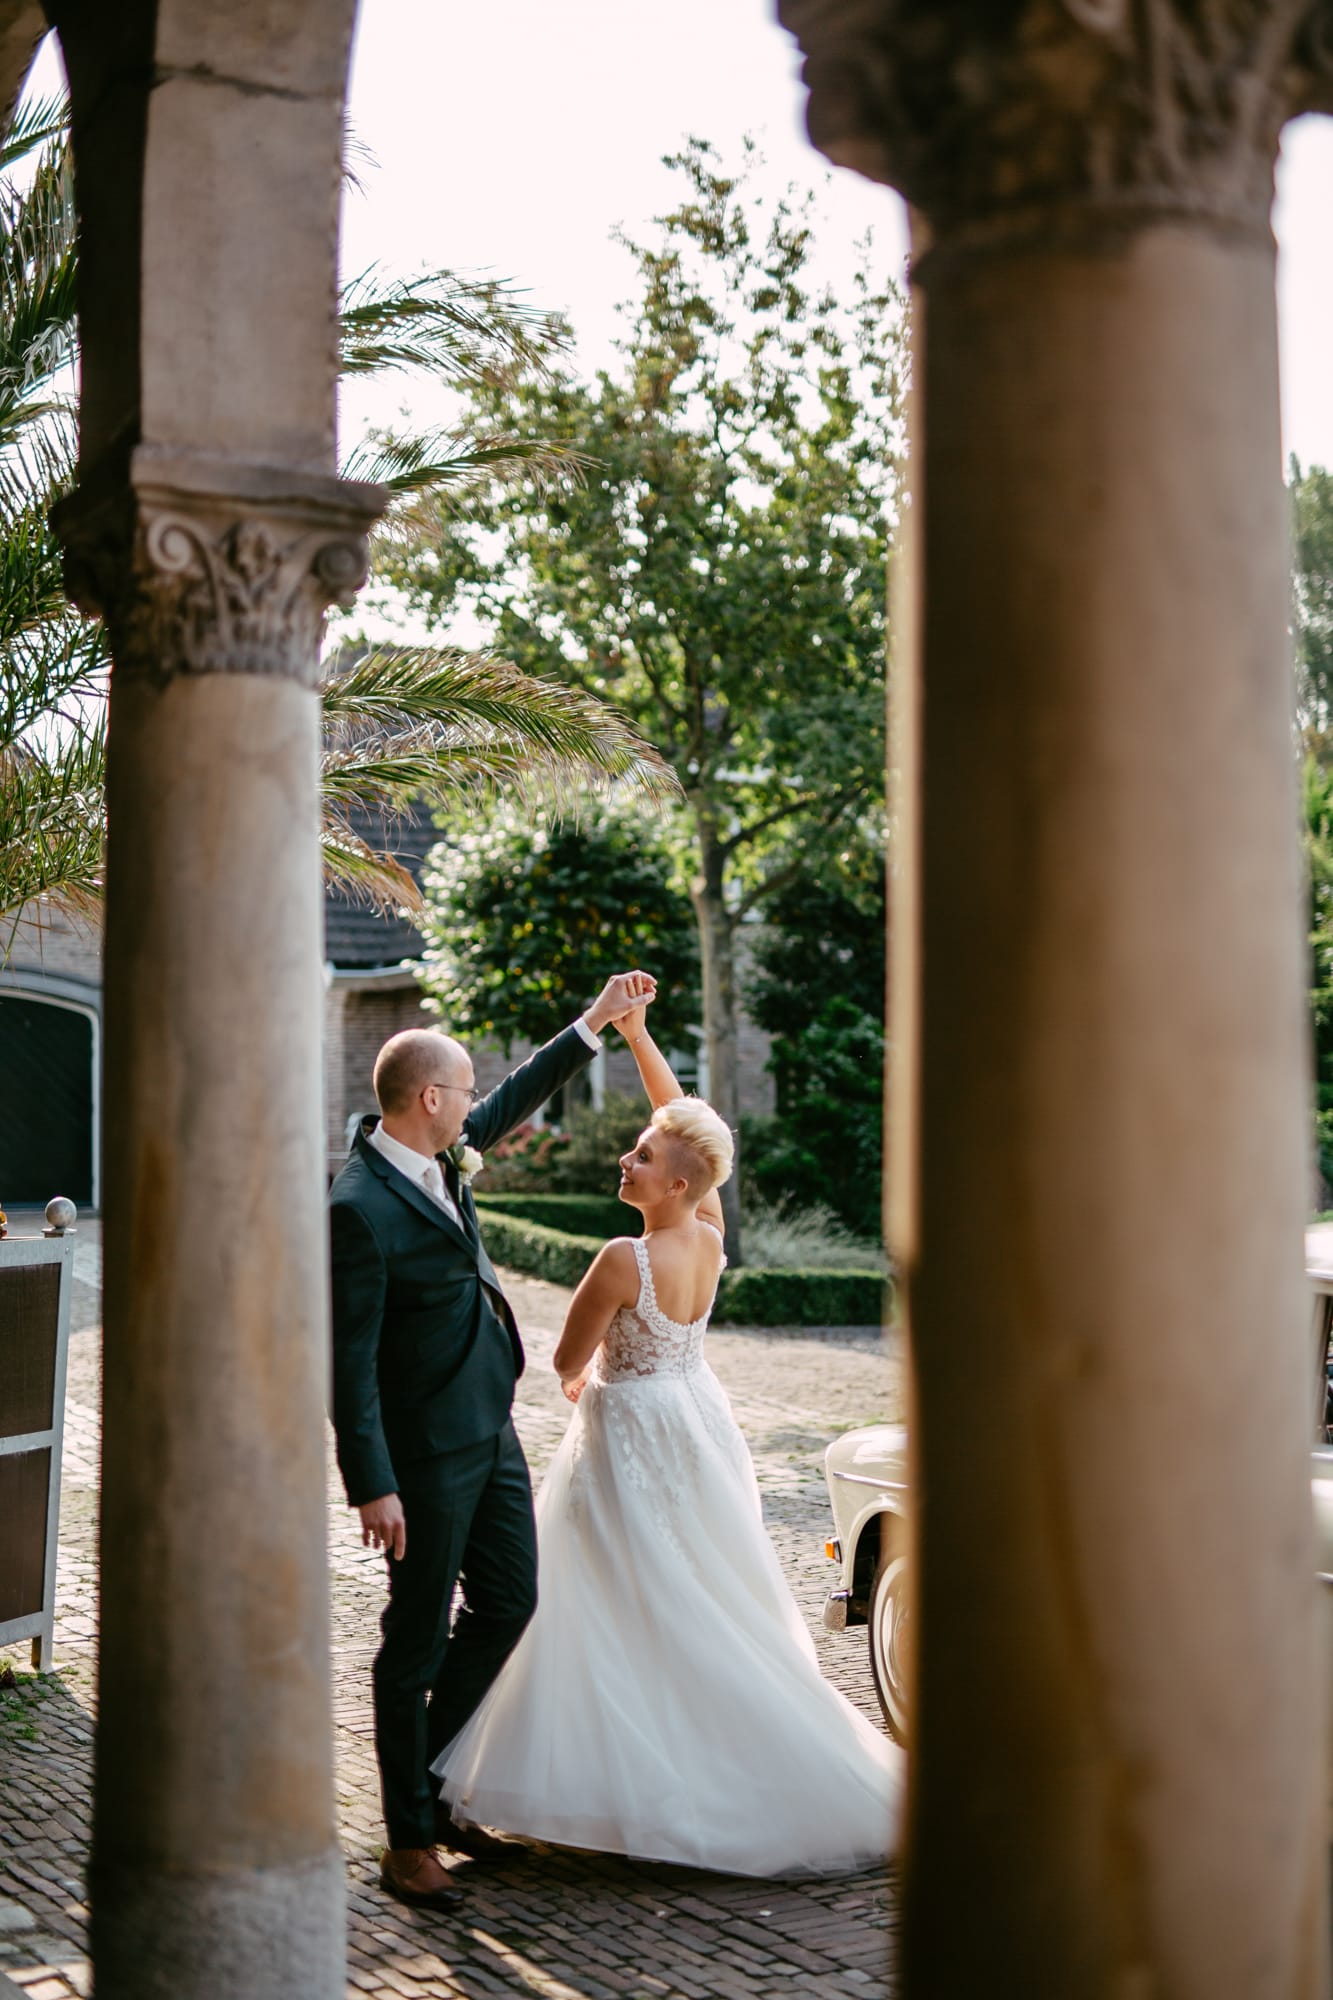 A bride and groom dancing elegantly in front of a beautiful arch.